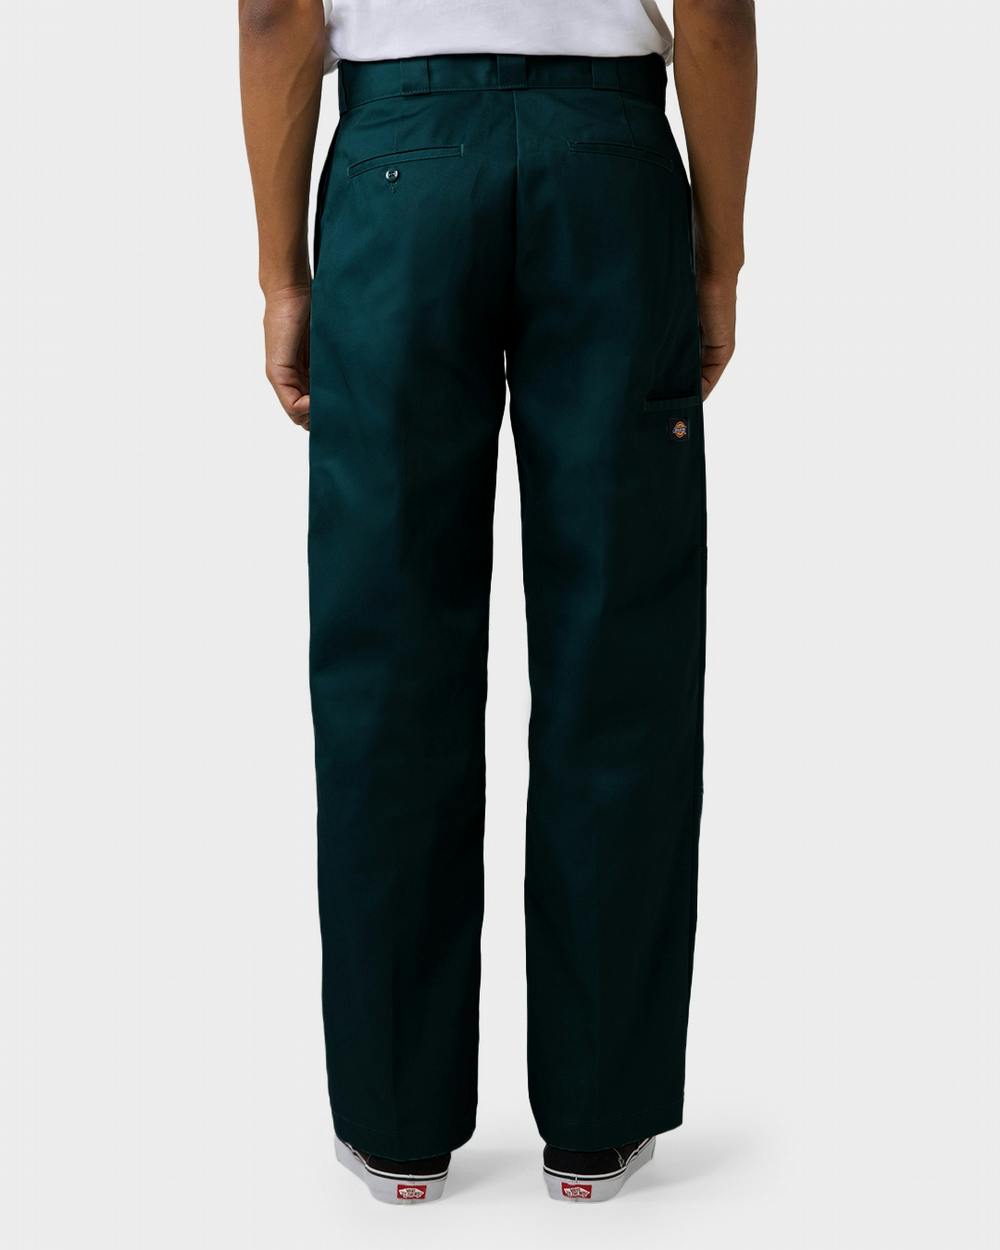 Dickies Loose Fit Double Knee Work Pants, Hunter Green, 34W x 30L,   price tracker / tracking,  price history charts,  price  watches,  price drop alerts